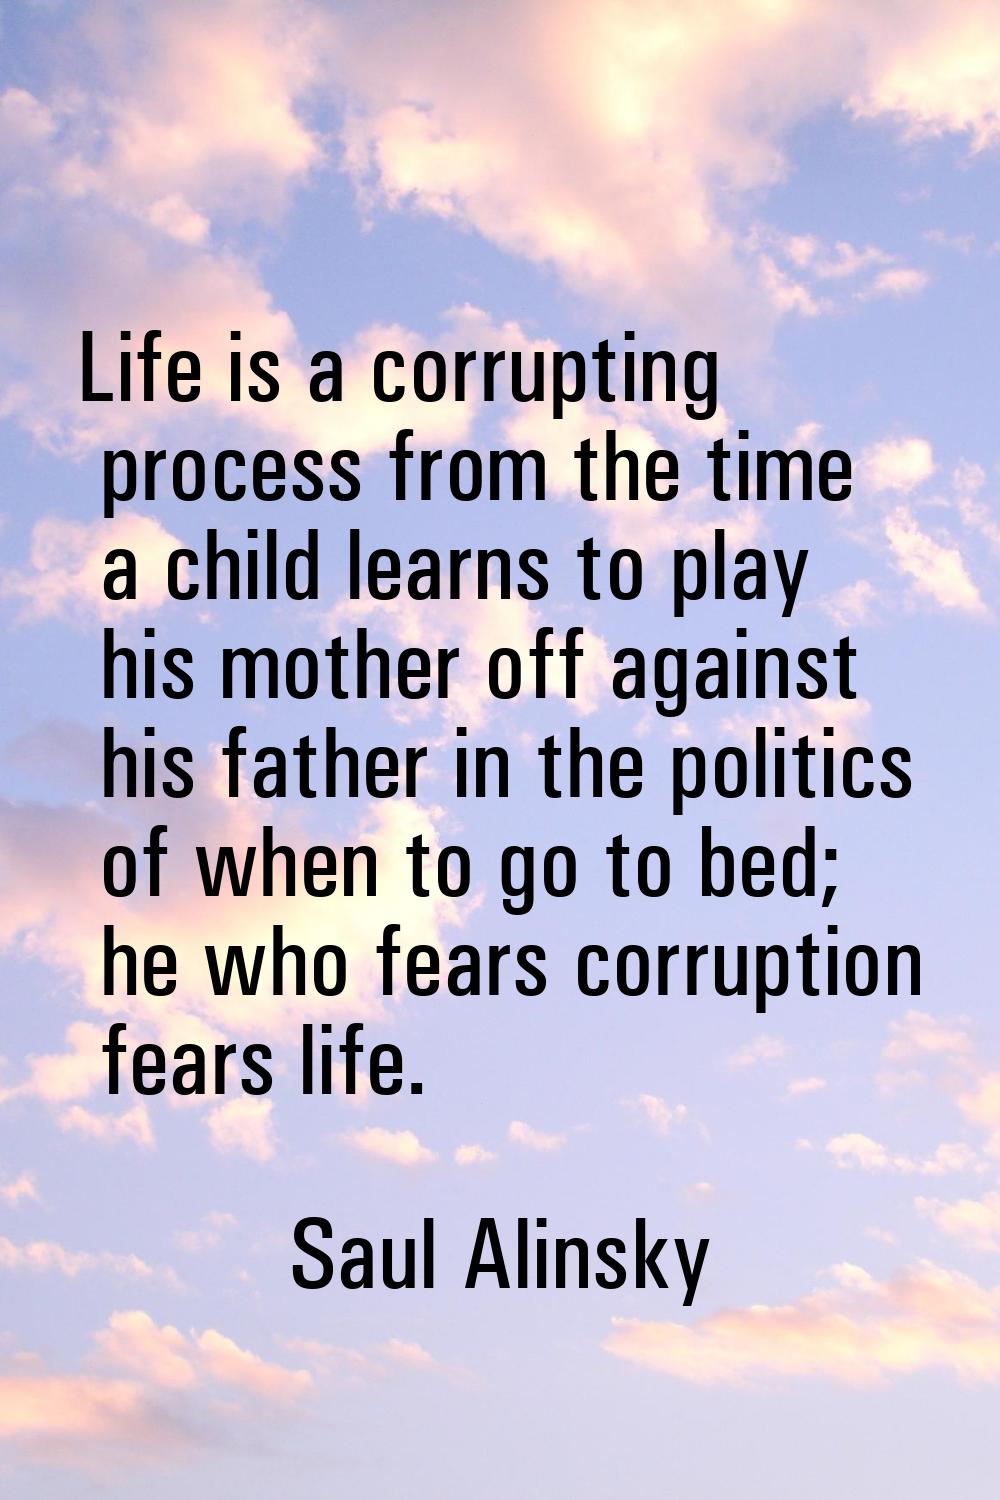 Life is a corrupting process from the time a child learns to play his mother off against his father